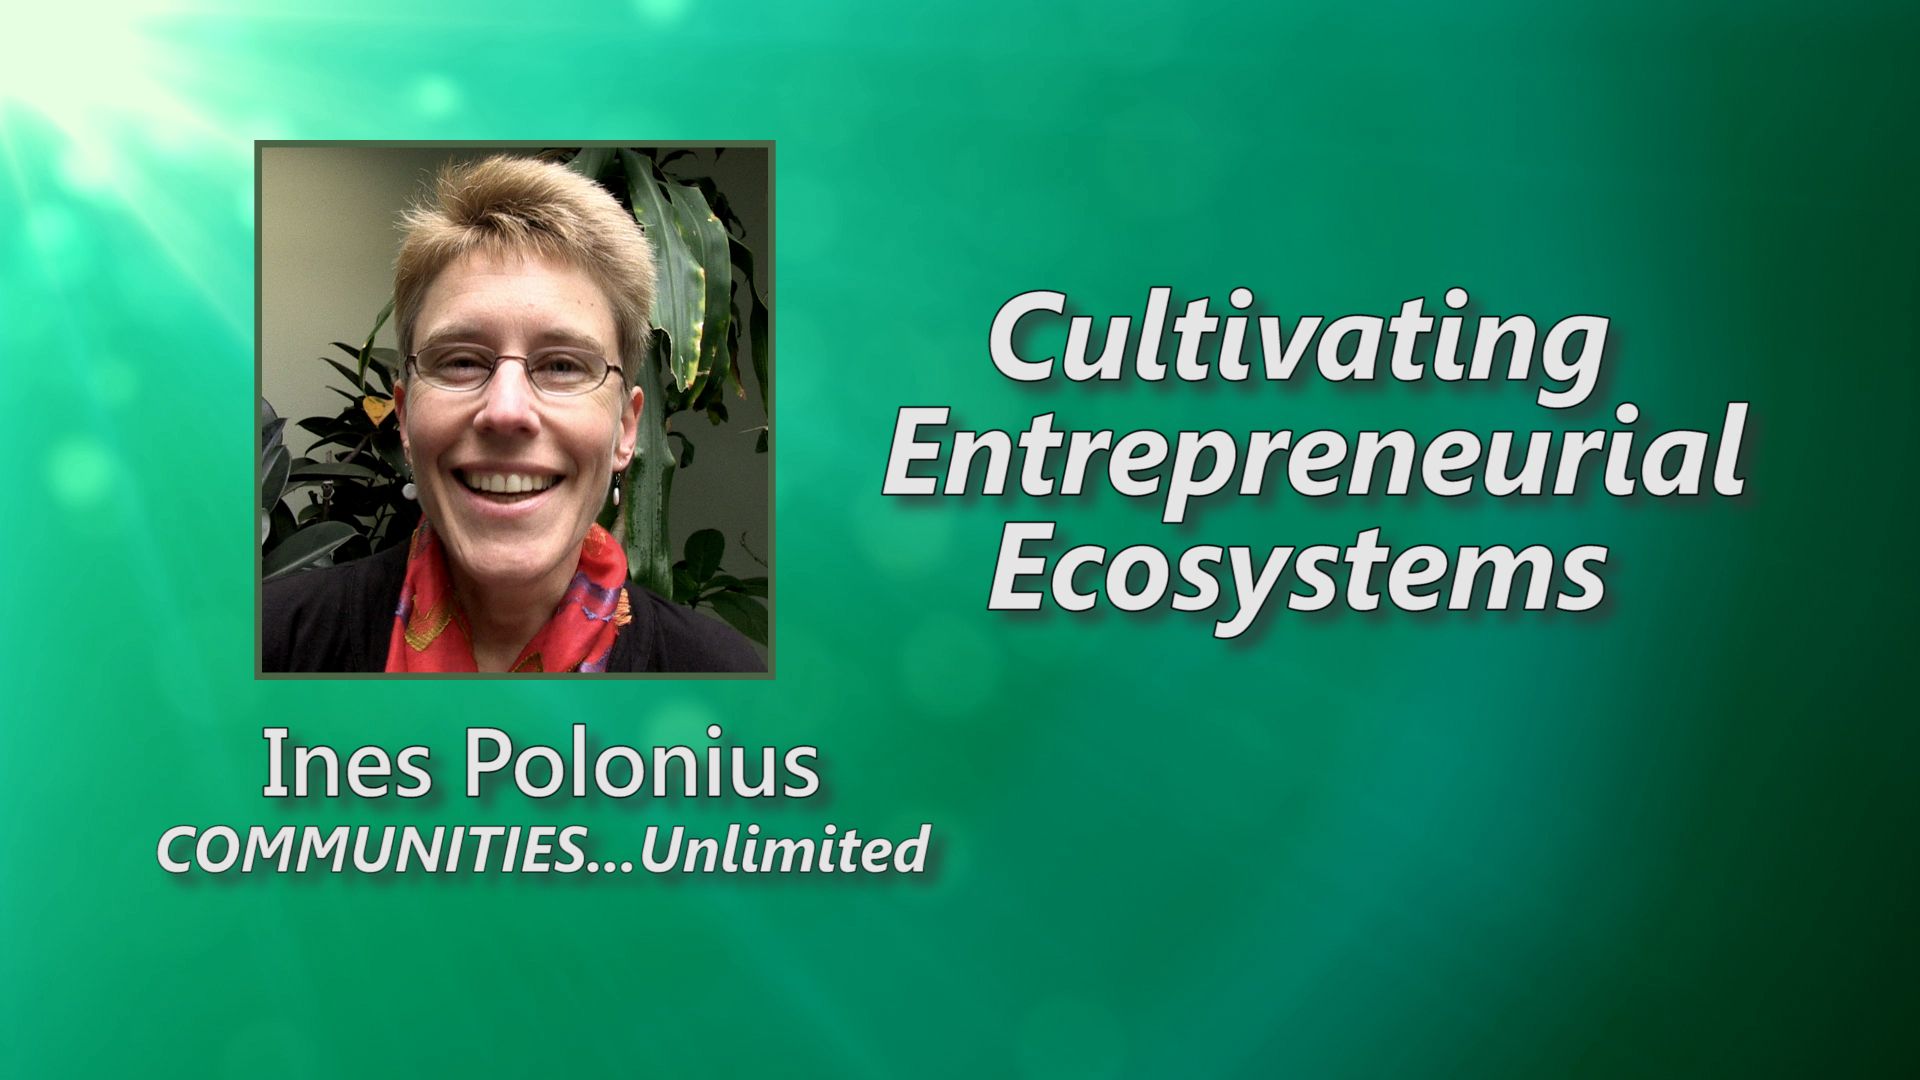 Video - Cultivating Entrepreneurial Ecosystems